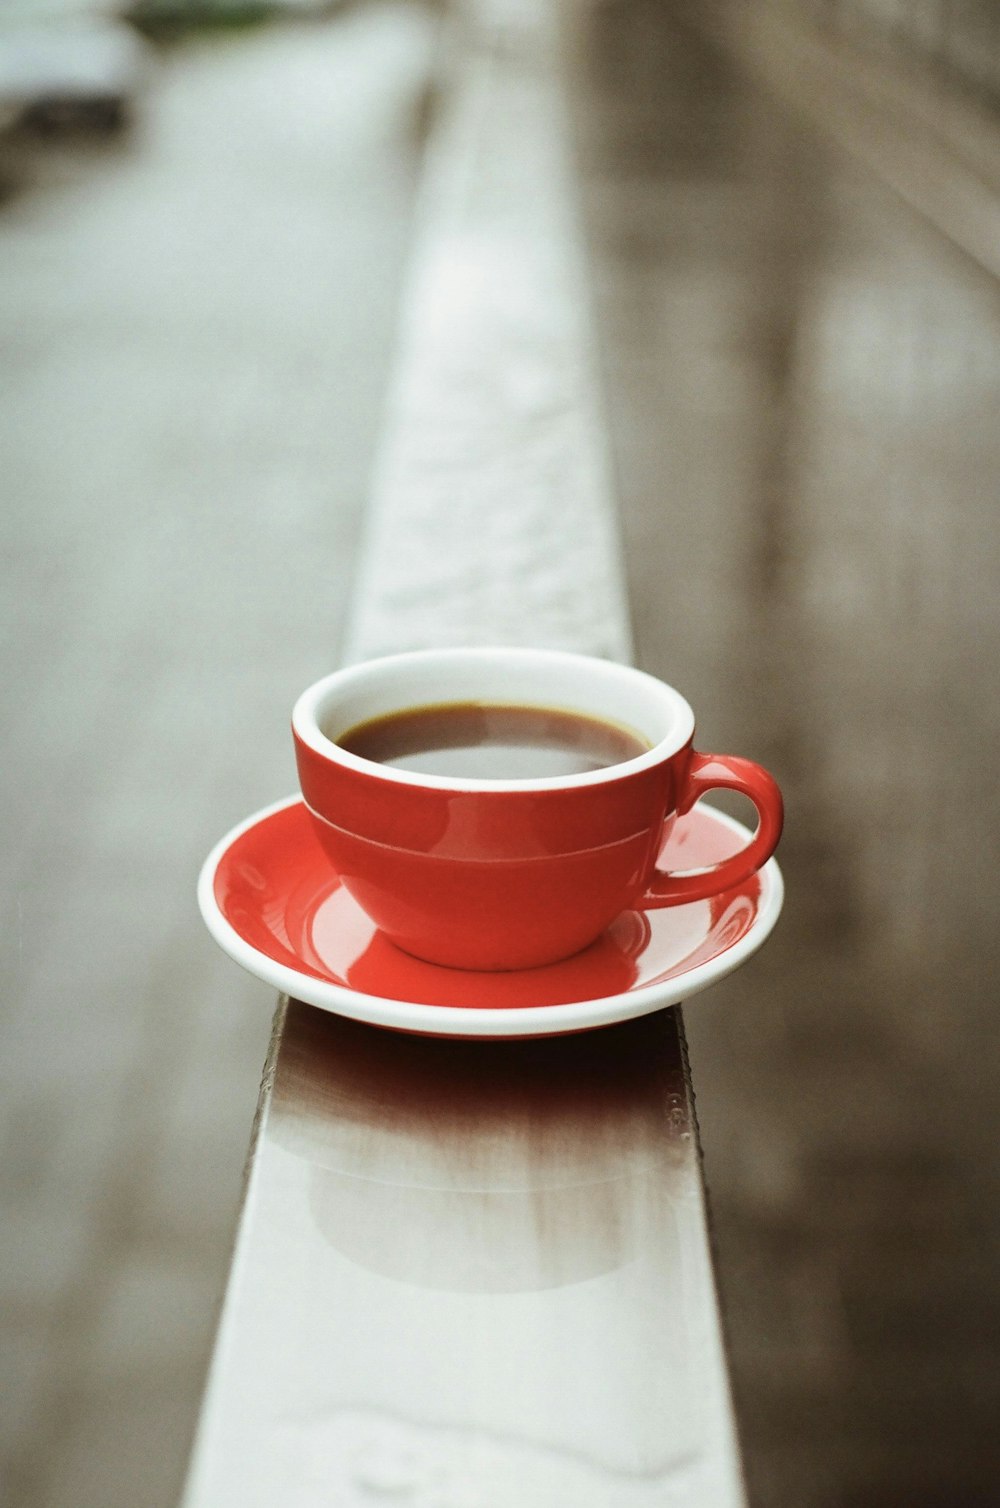 red ceramic teacup on red saucer on brown wooden table